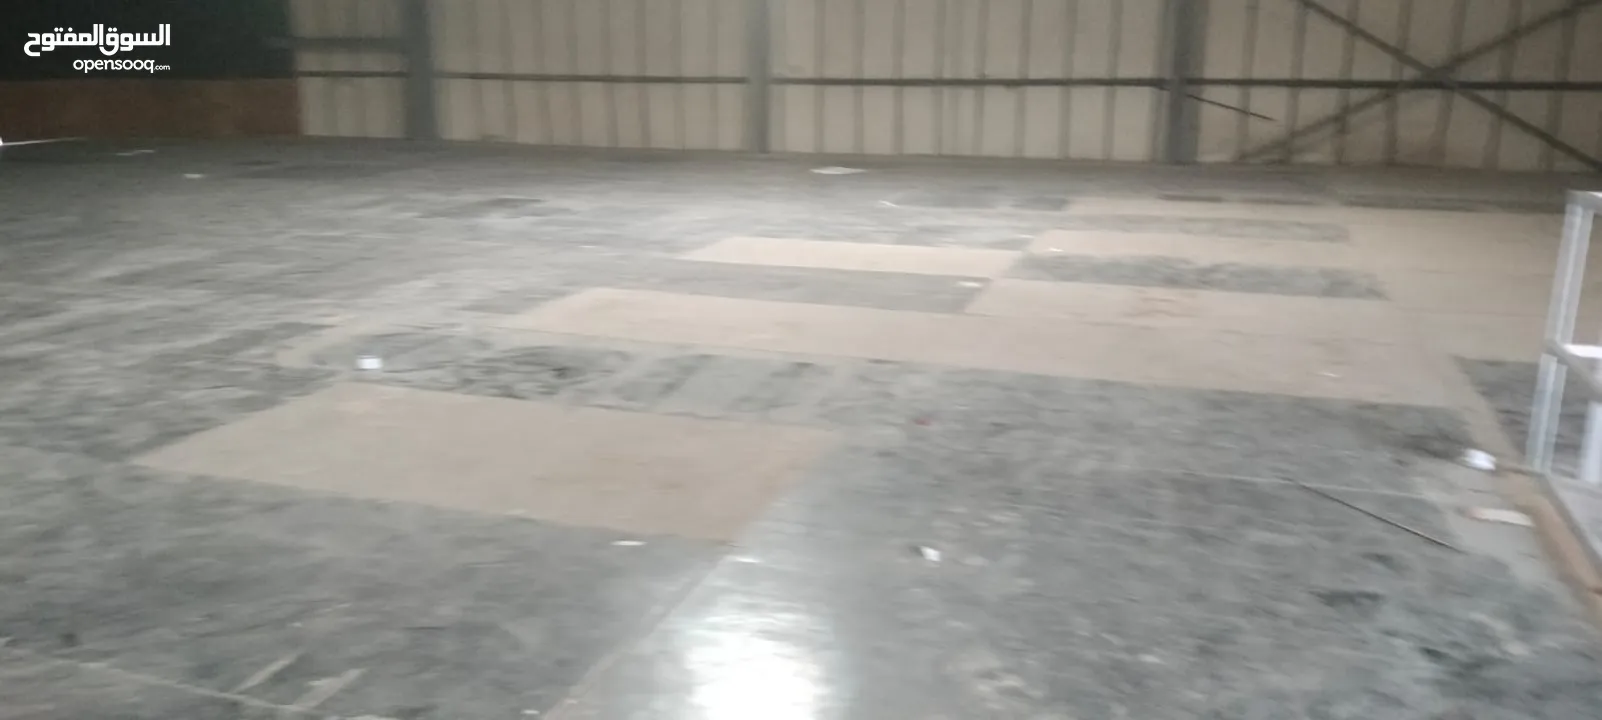 Warehouse For Commercial Business